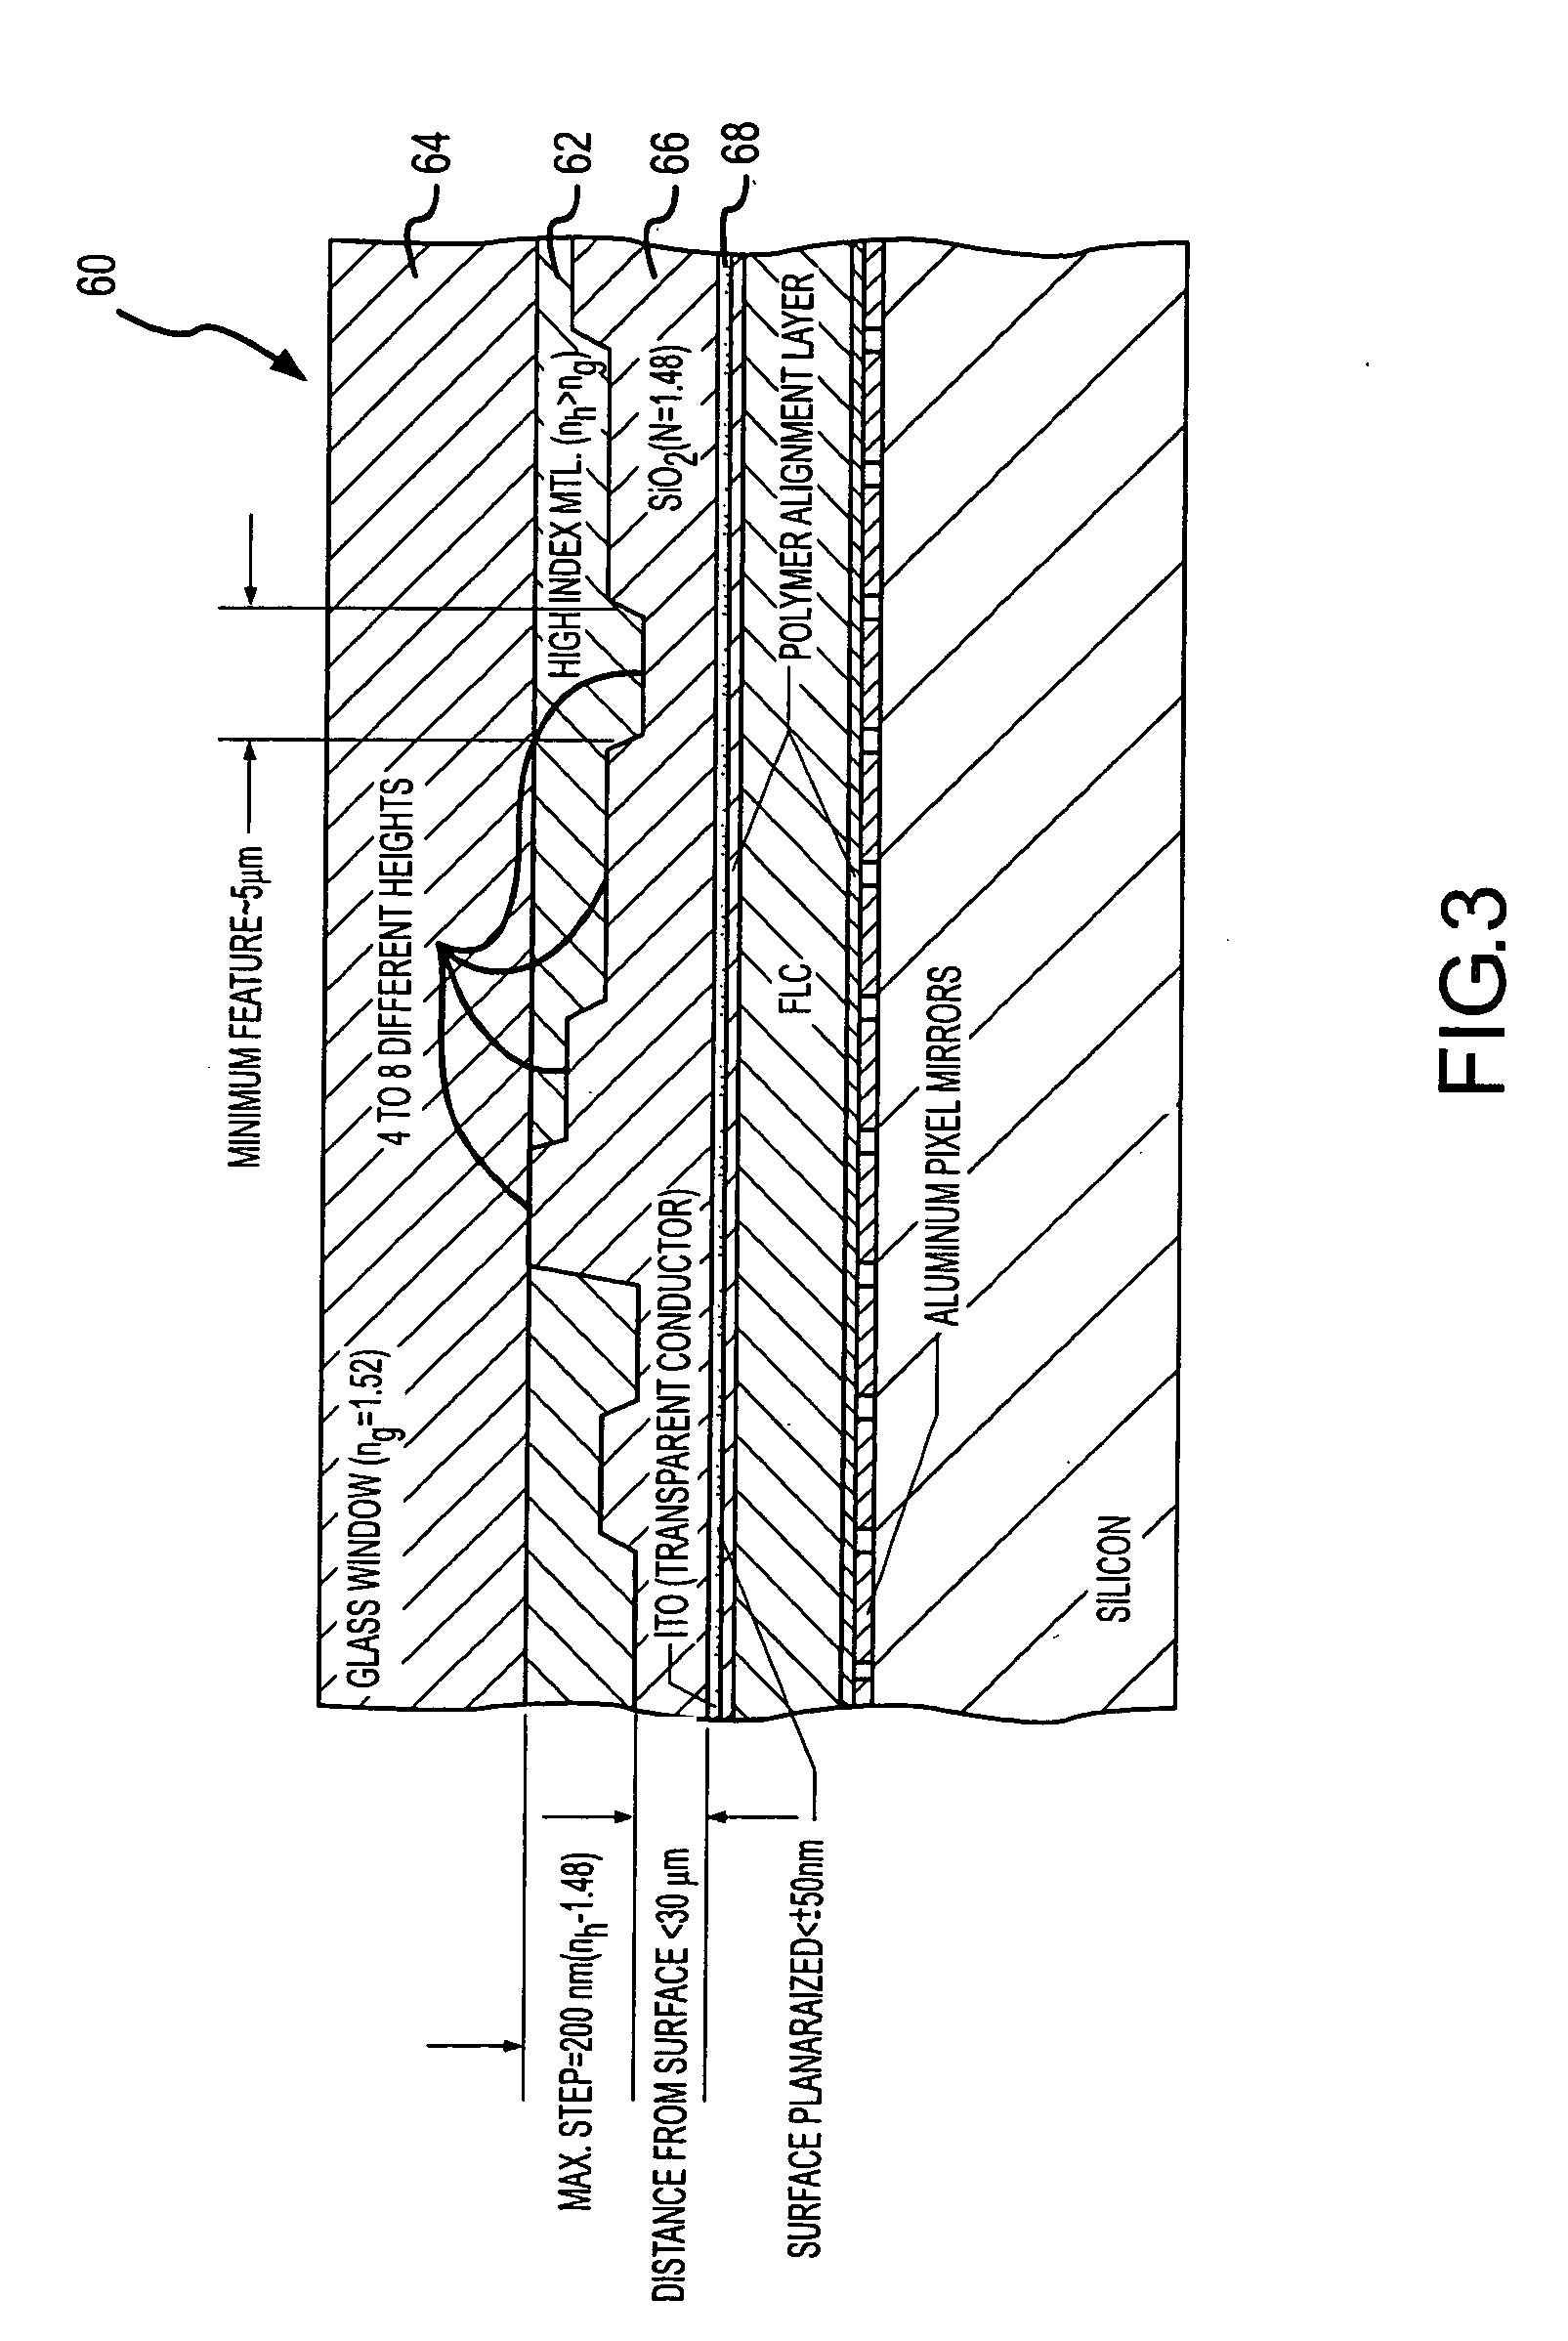 Phase masks for use in holographic data storage